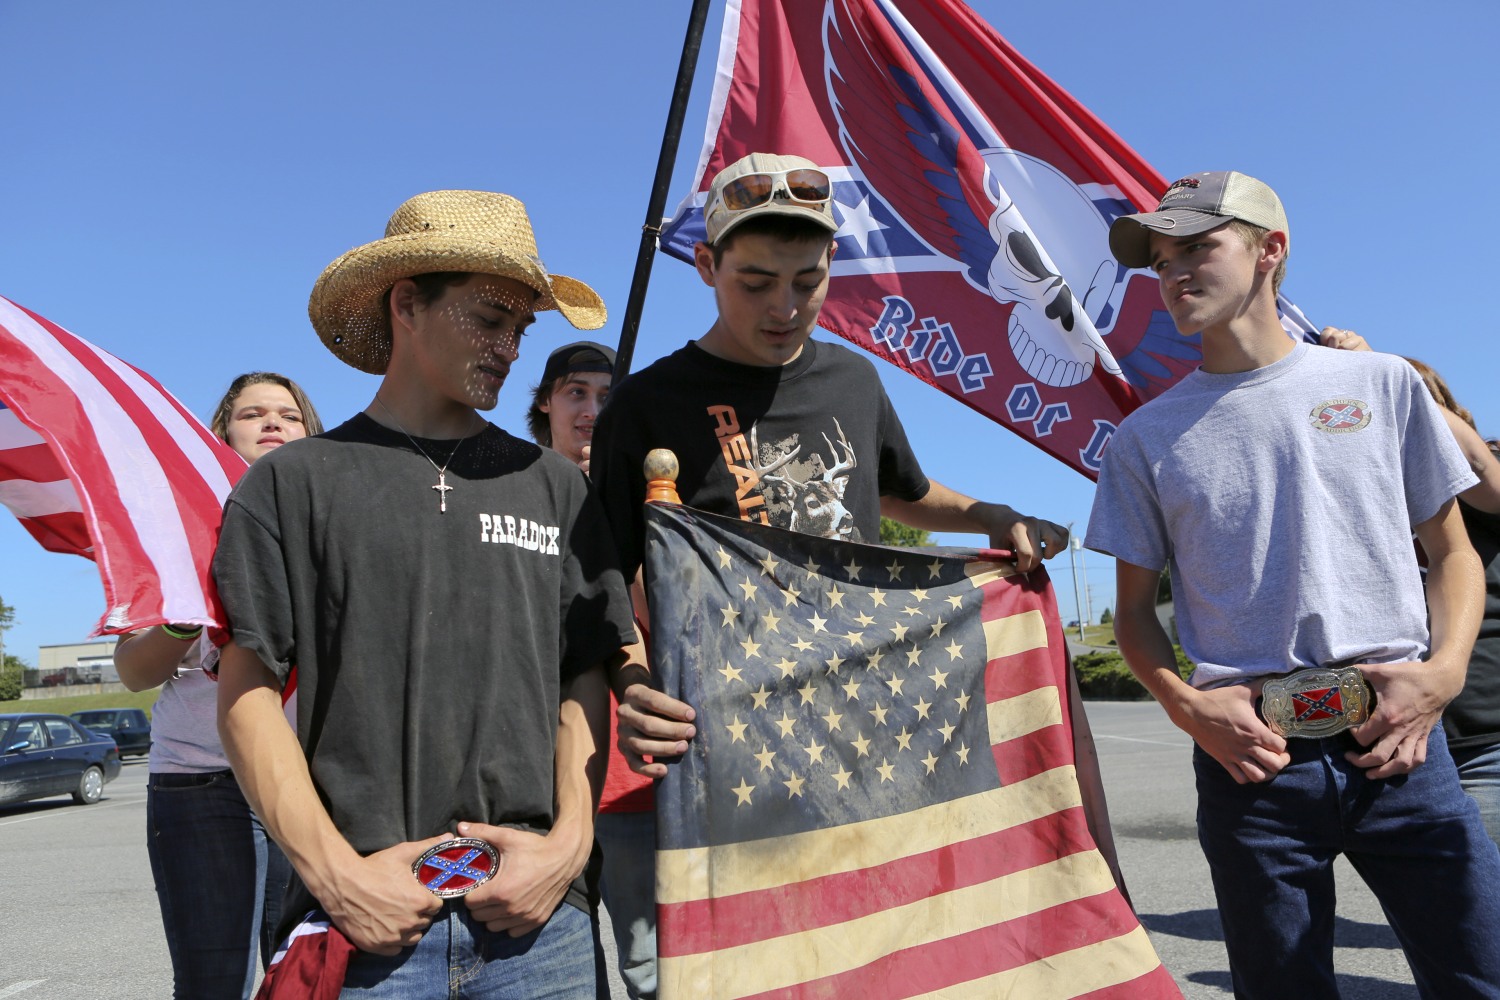 Whitney High School disciplines student over Confederate flag